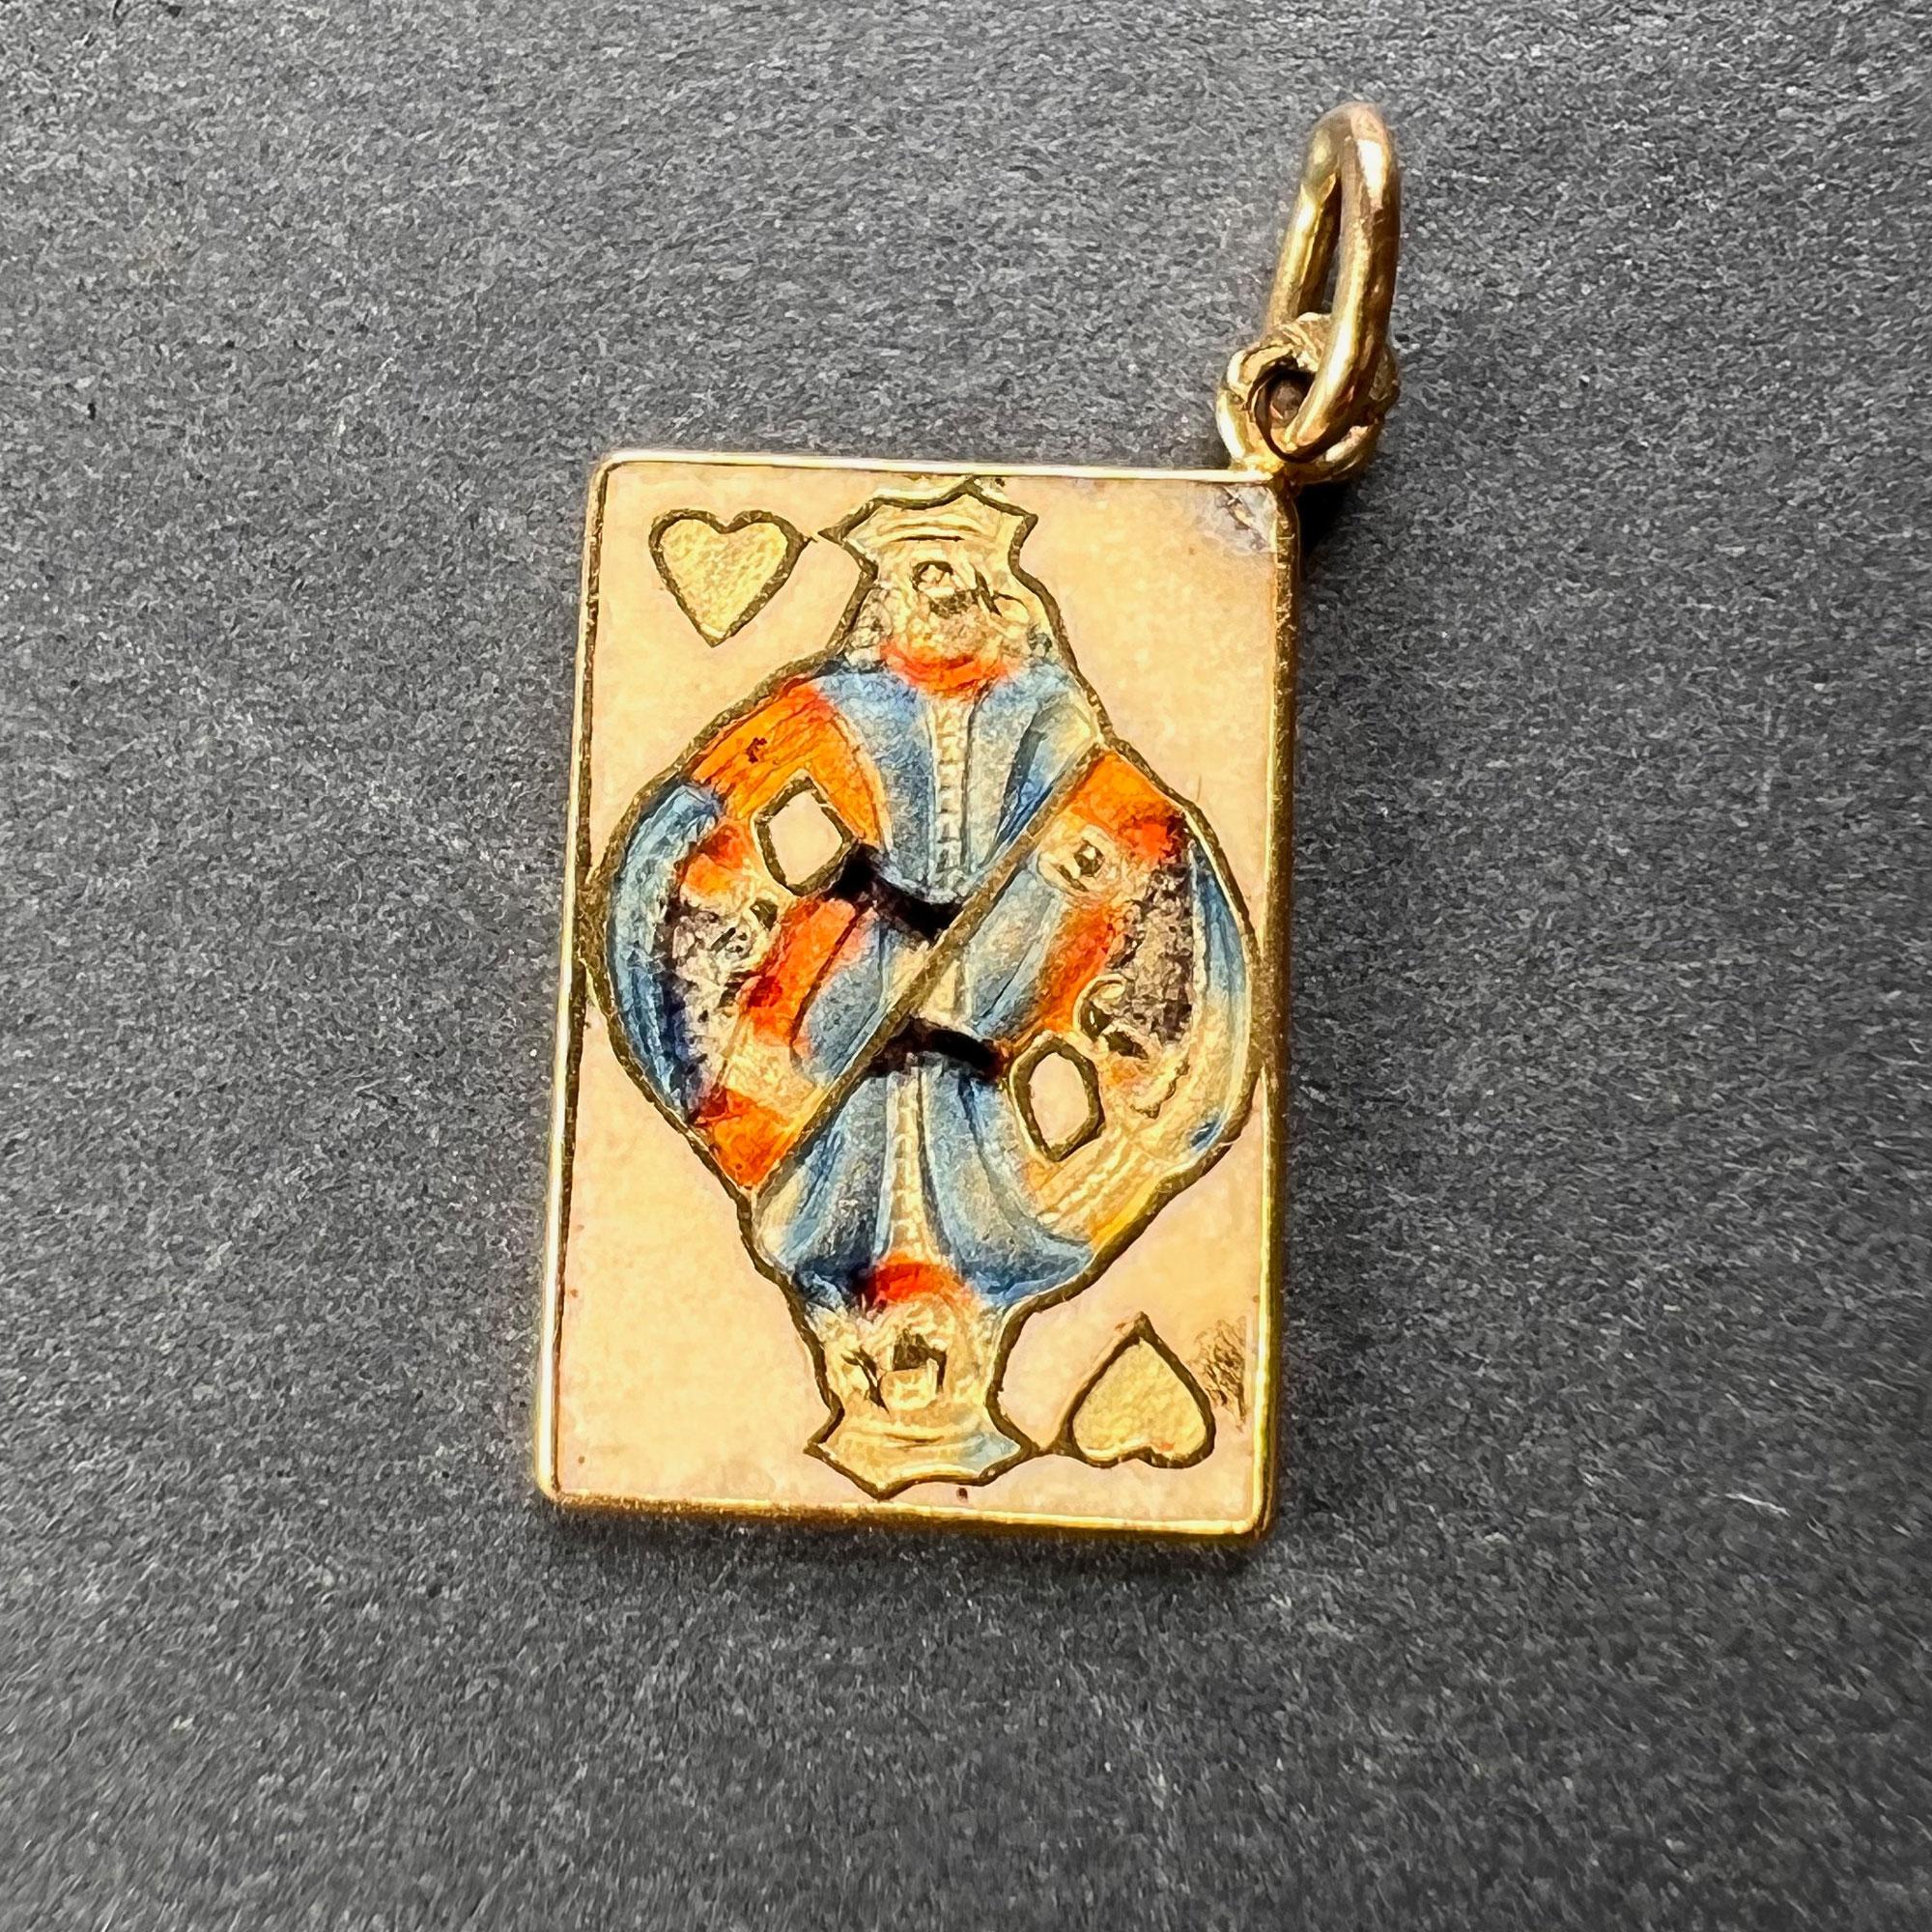 An 18 karat (18K) yellow gold and enamel charm pendant designed as the King of Hearts playing card. Stamped with the eagle mark for 18 karat gold and French manufacture.
 
Dimensions: 1.7 x 1 x 0.1 cm (not including jump ring)
Weight: 1.90 grams